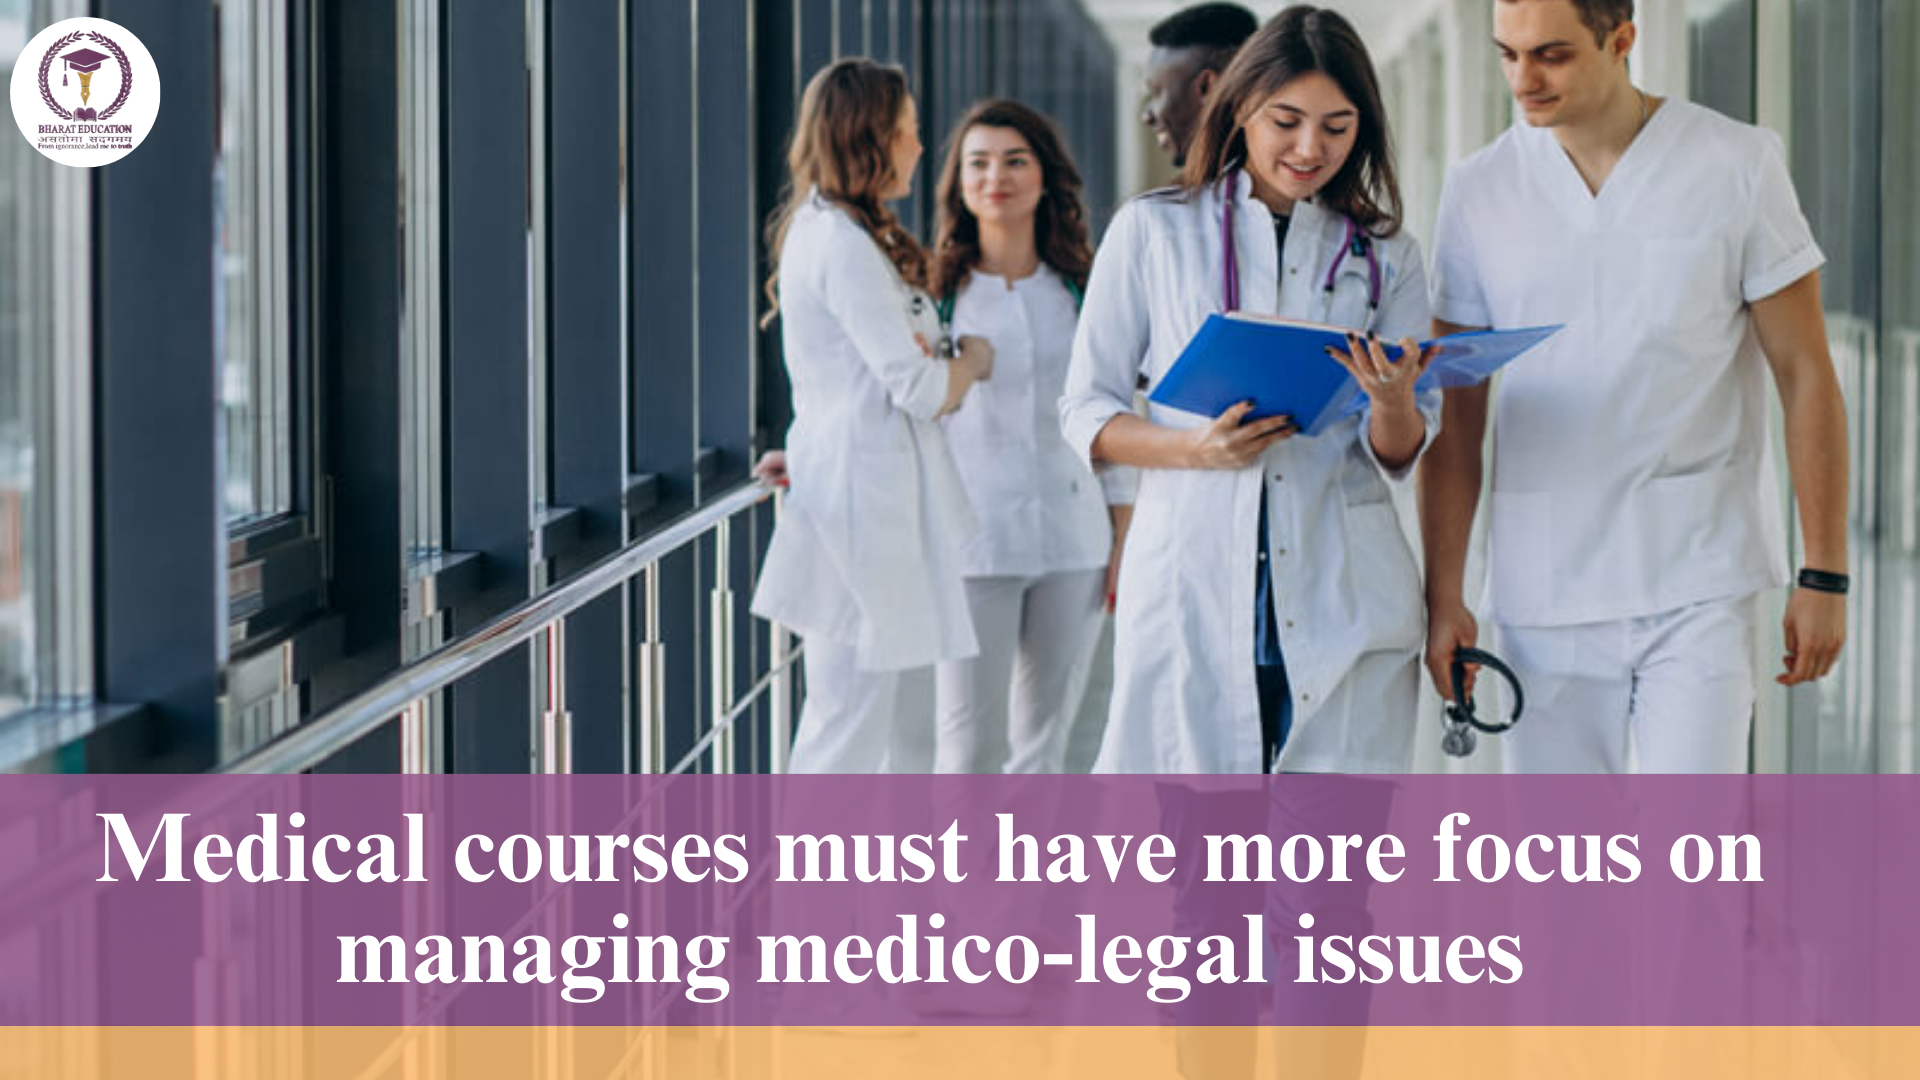 Medical courses must have more focus on managing medico-legal issues